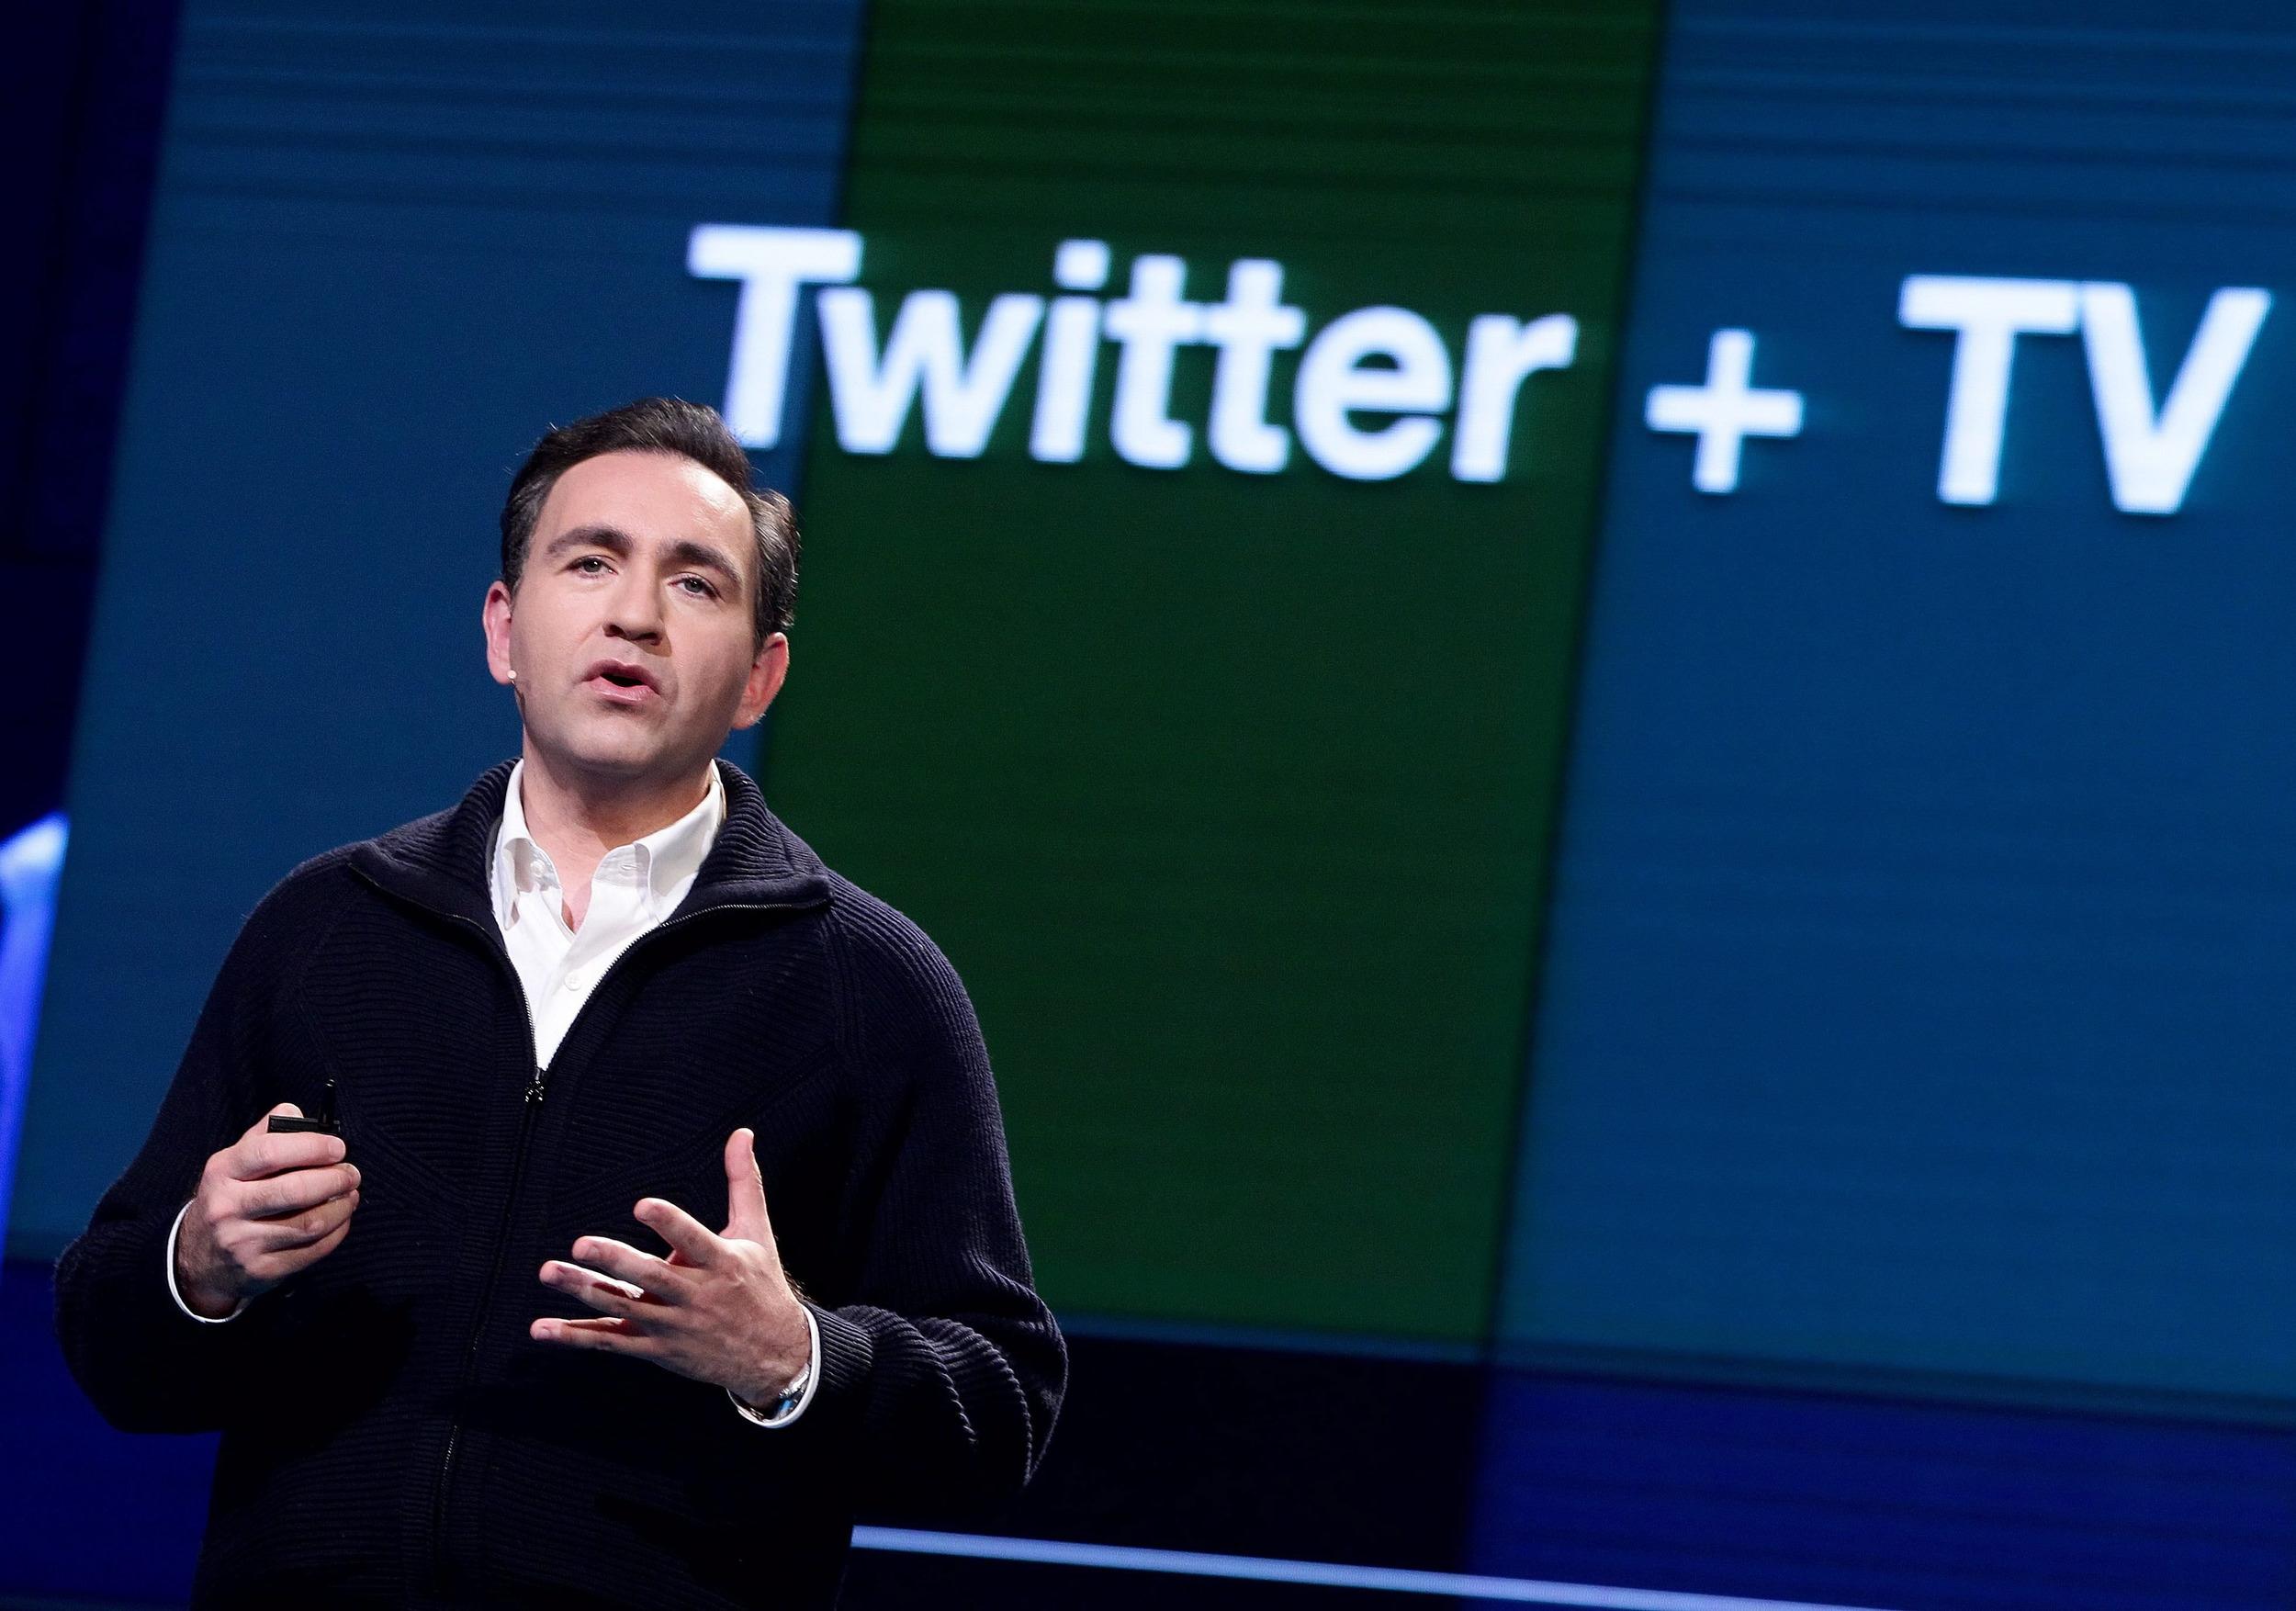 Twitter COO Ali Rowghani Tweets About His Resignation